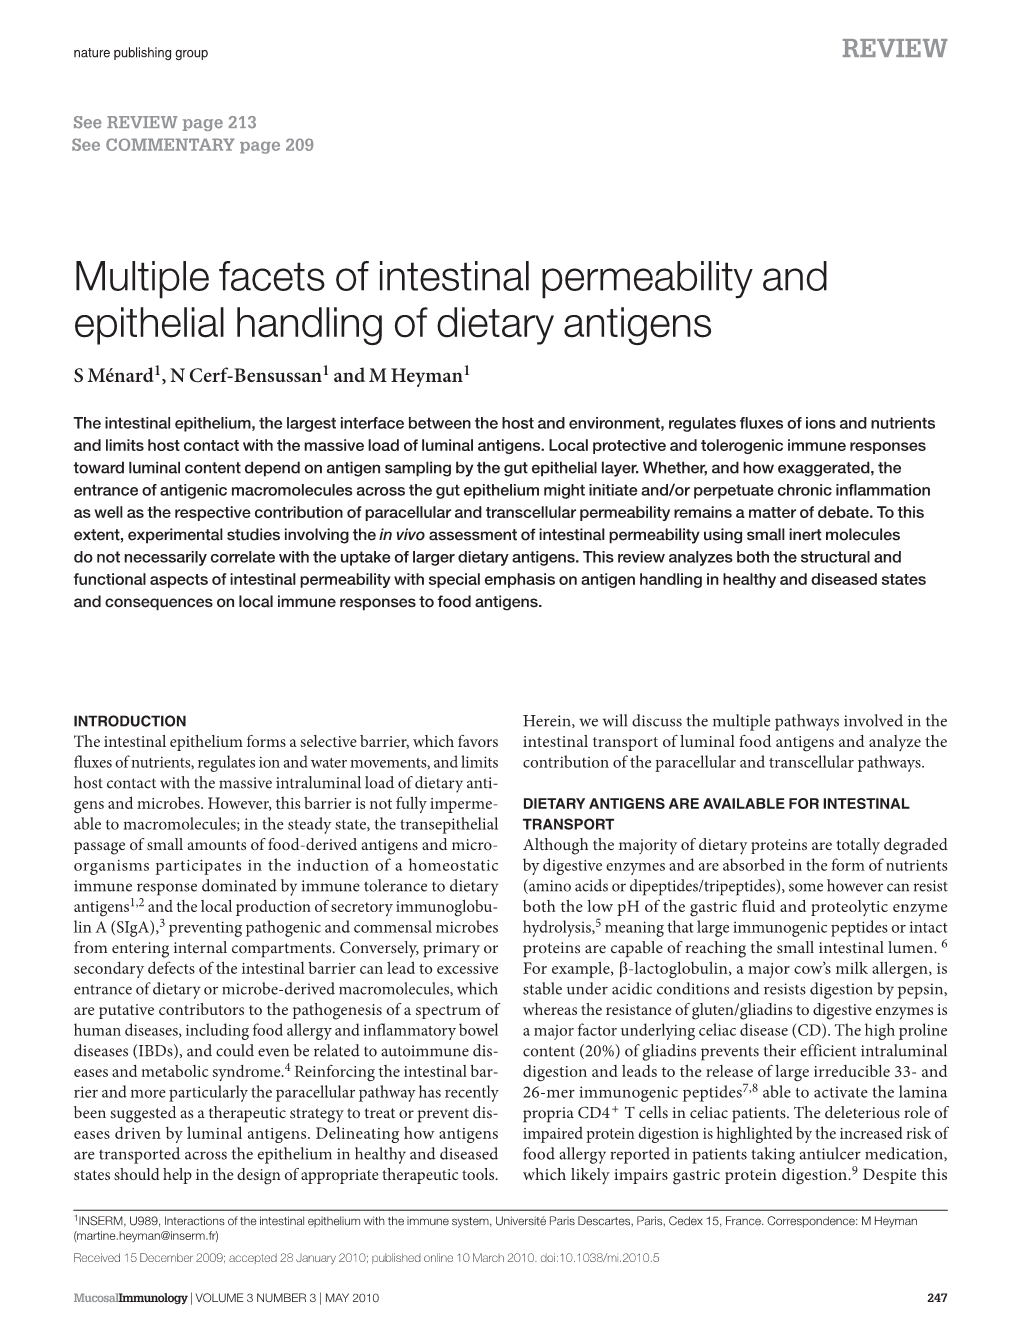 Multiple Facets of Intestinal Permeability and Epithelial Handling of Dietary Antigens